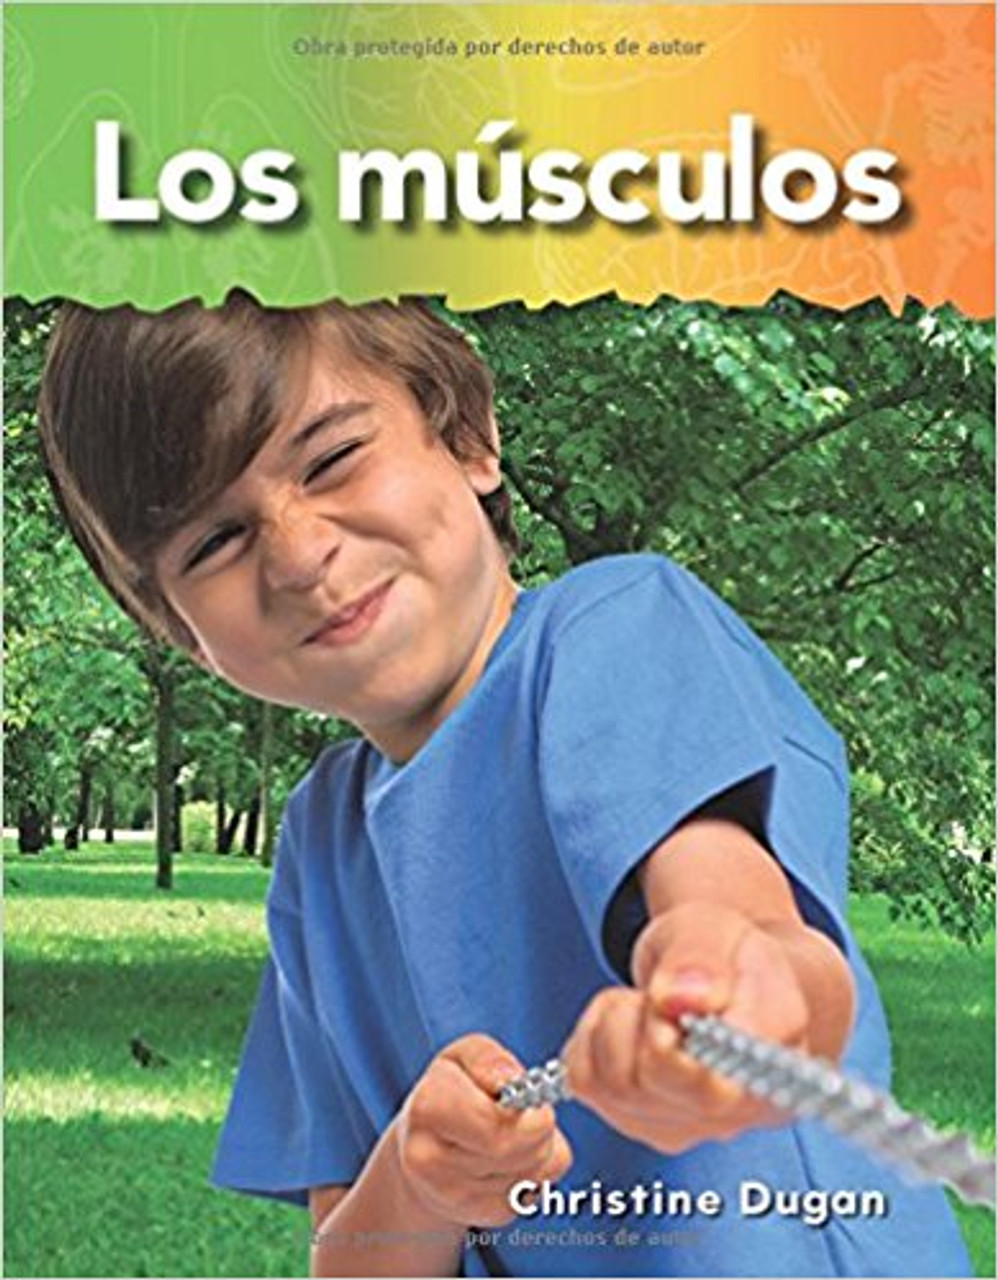 Los músculos (Muscles) by Christine Dugan